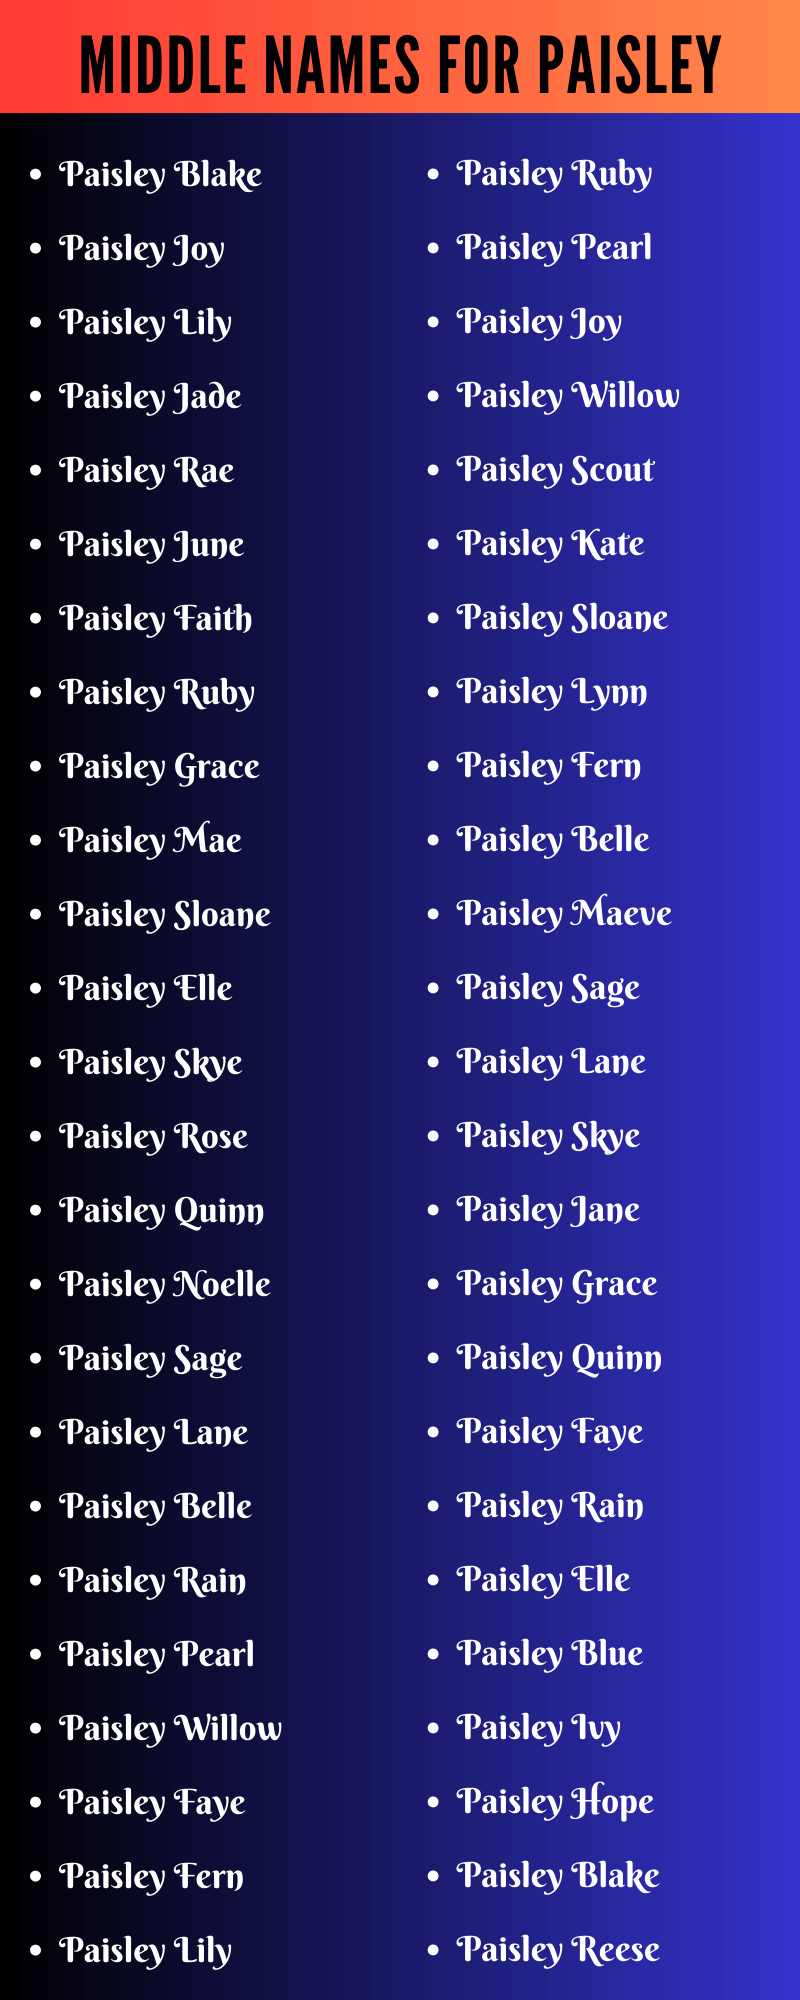 Middle Names For Paisley